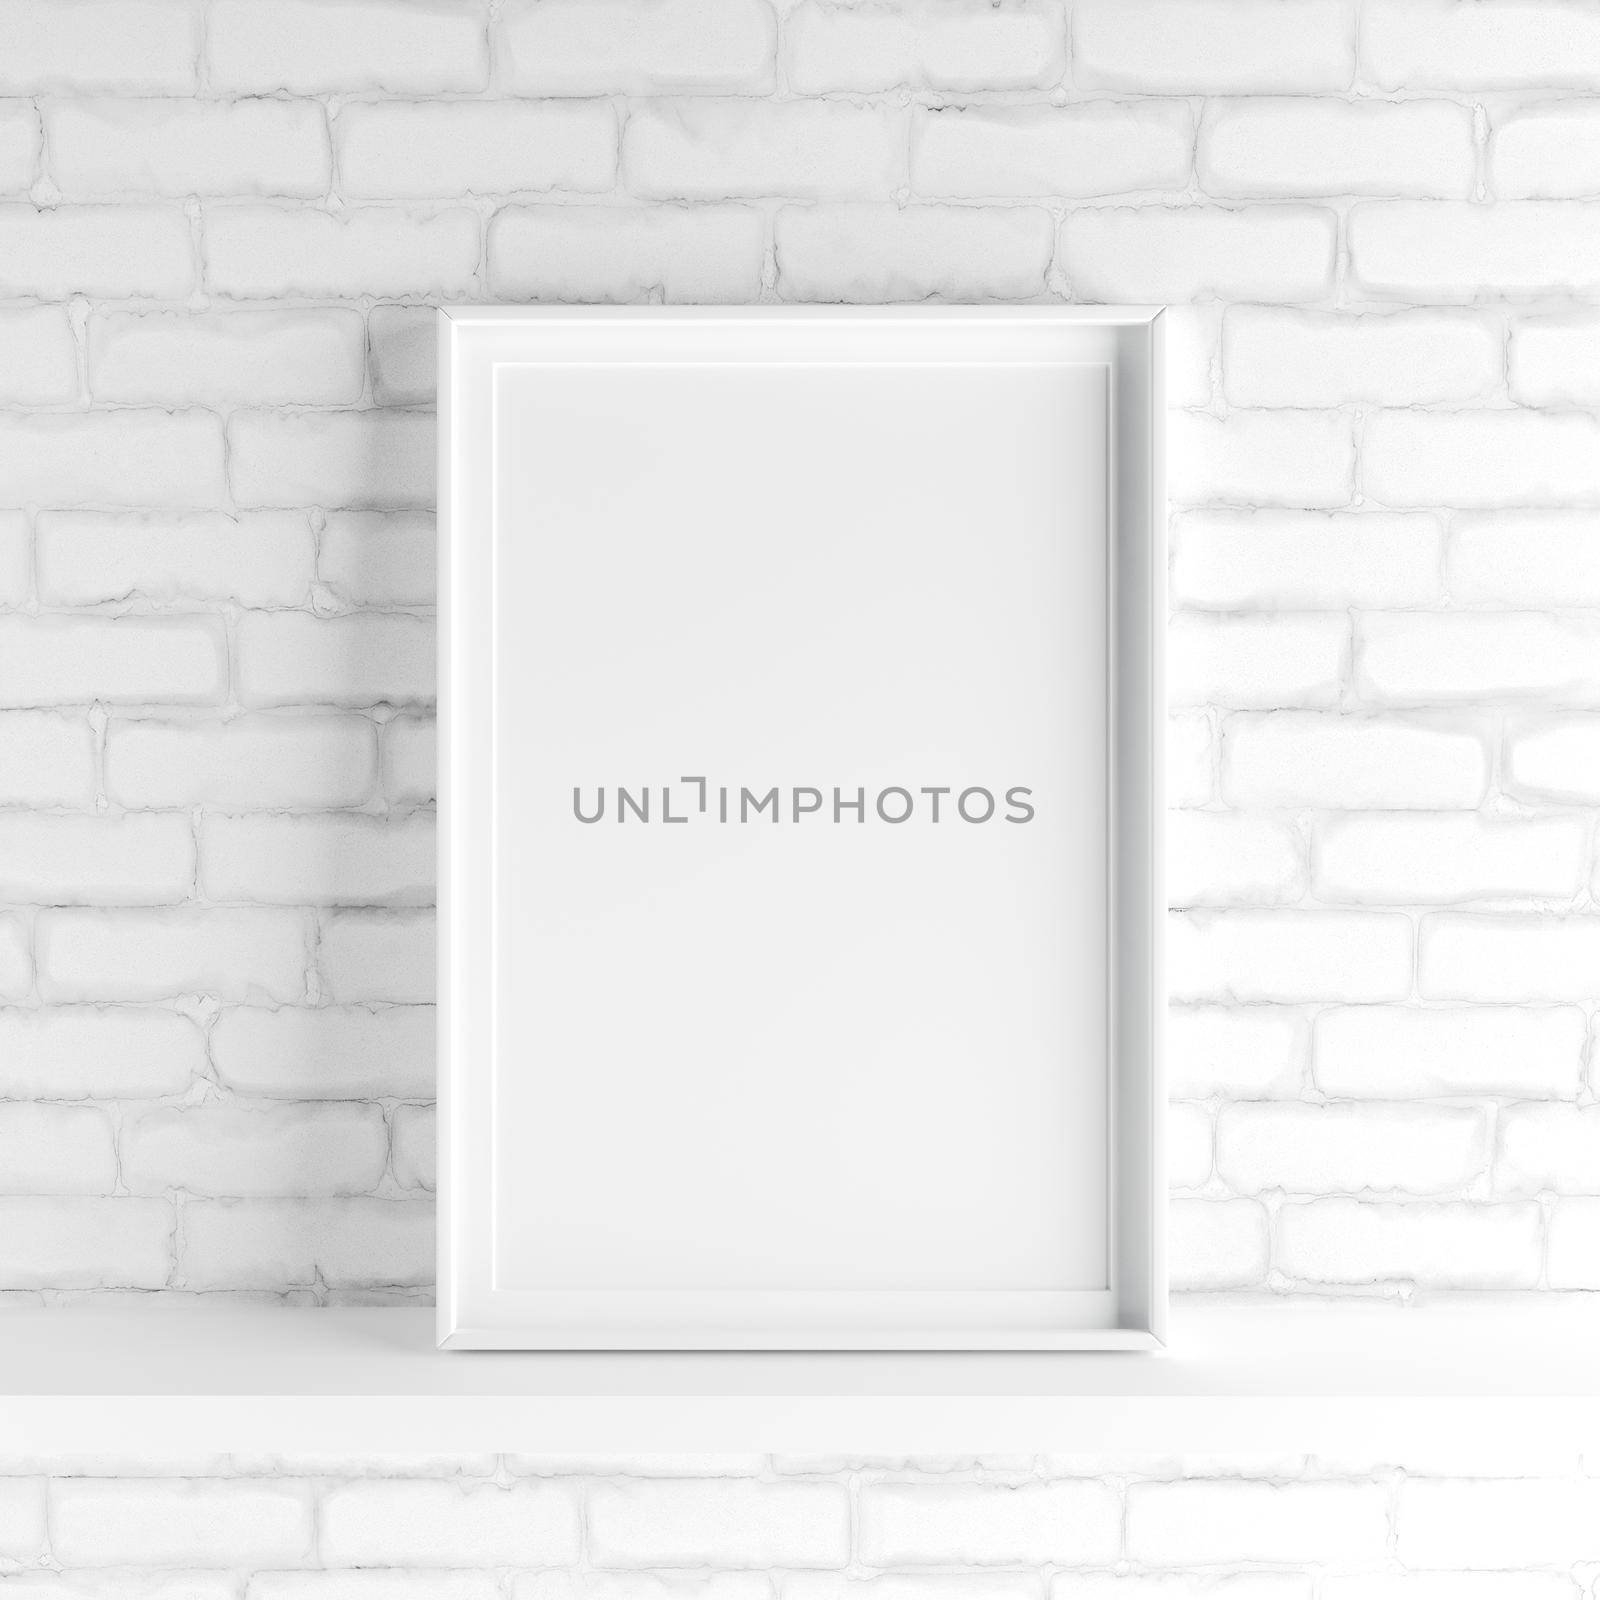 Elegant and minimalistic portrait picture frame standing on white painted brick wall. Design element. 3D render